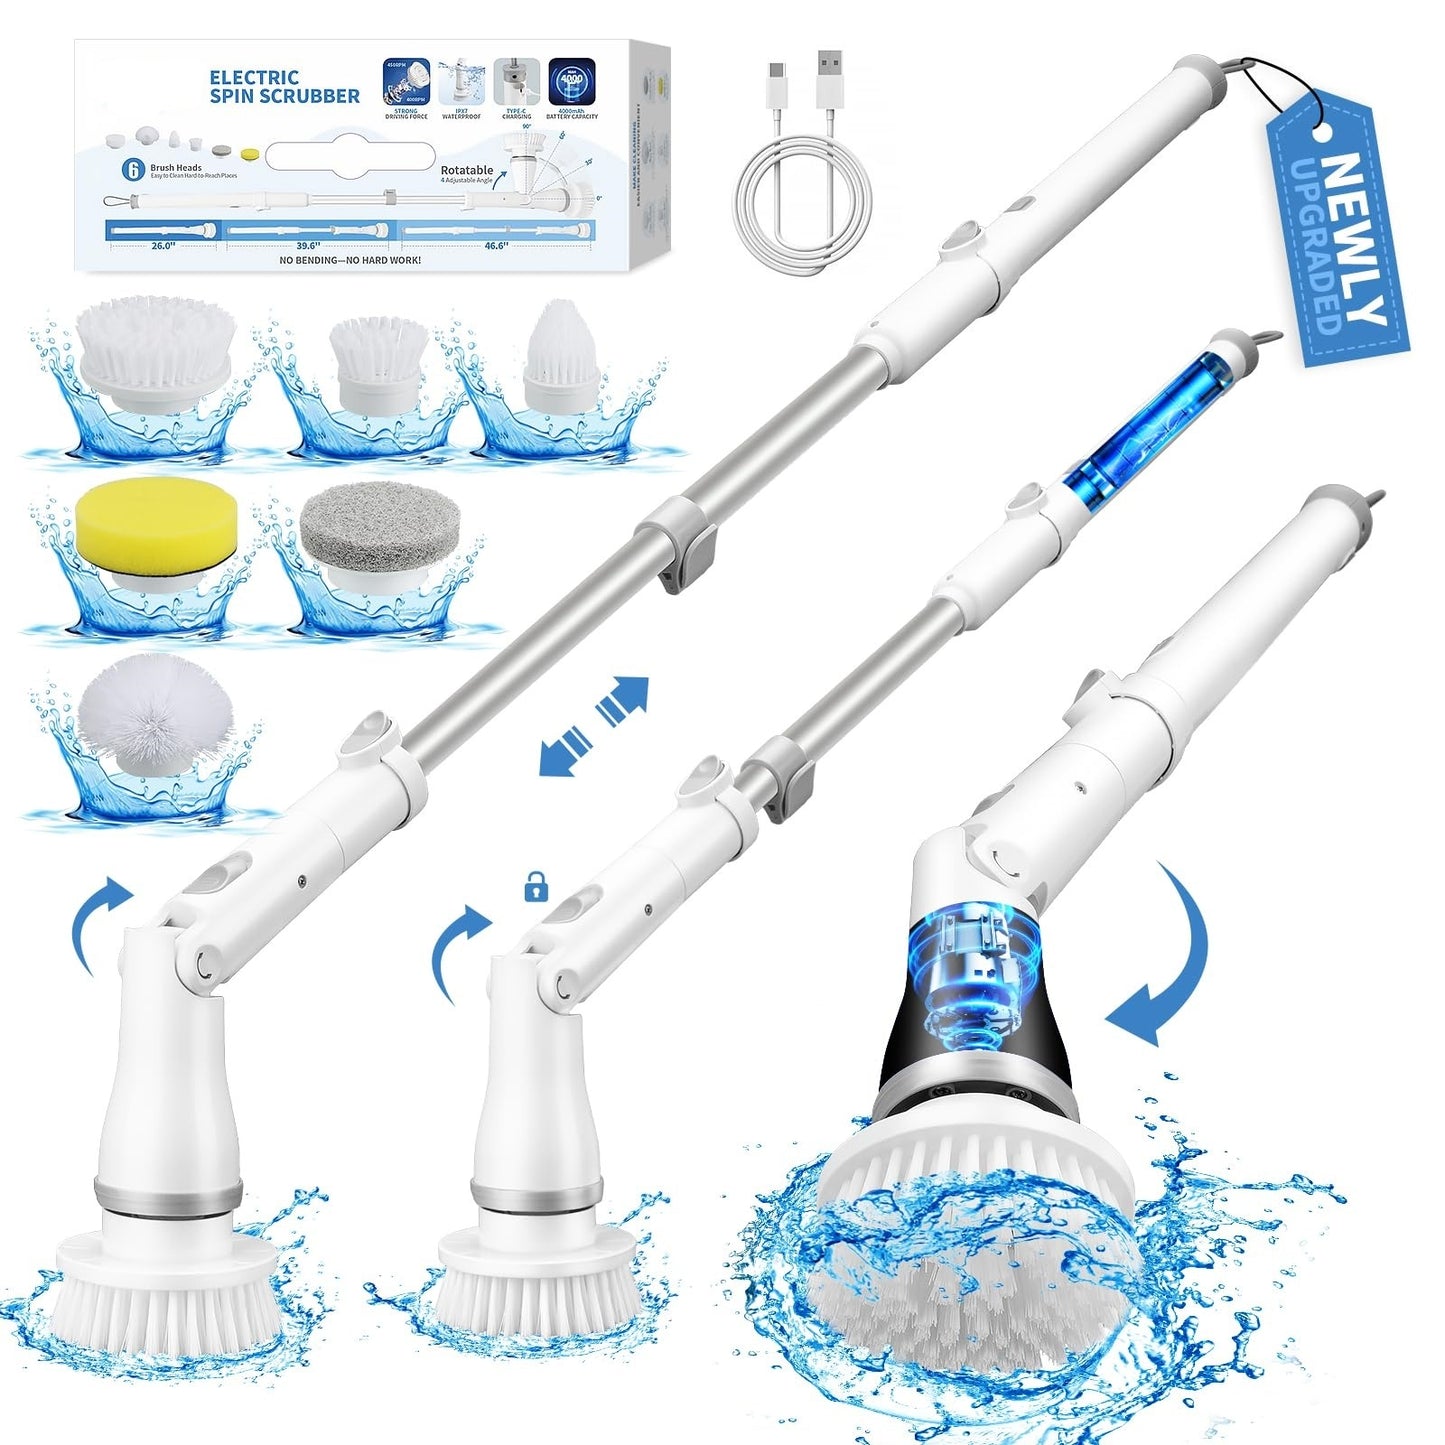 Electric Spin Scrubber, Bathroom Cleaning Brush, 2 Speeds With 5 Replacement Heads, Shower Scrubber Brush With Long Handle For Kitchen, Bathtub, Floor, Toilet,